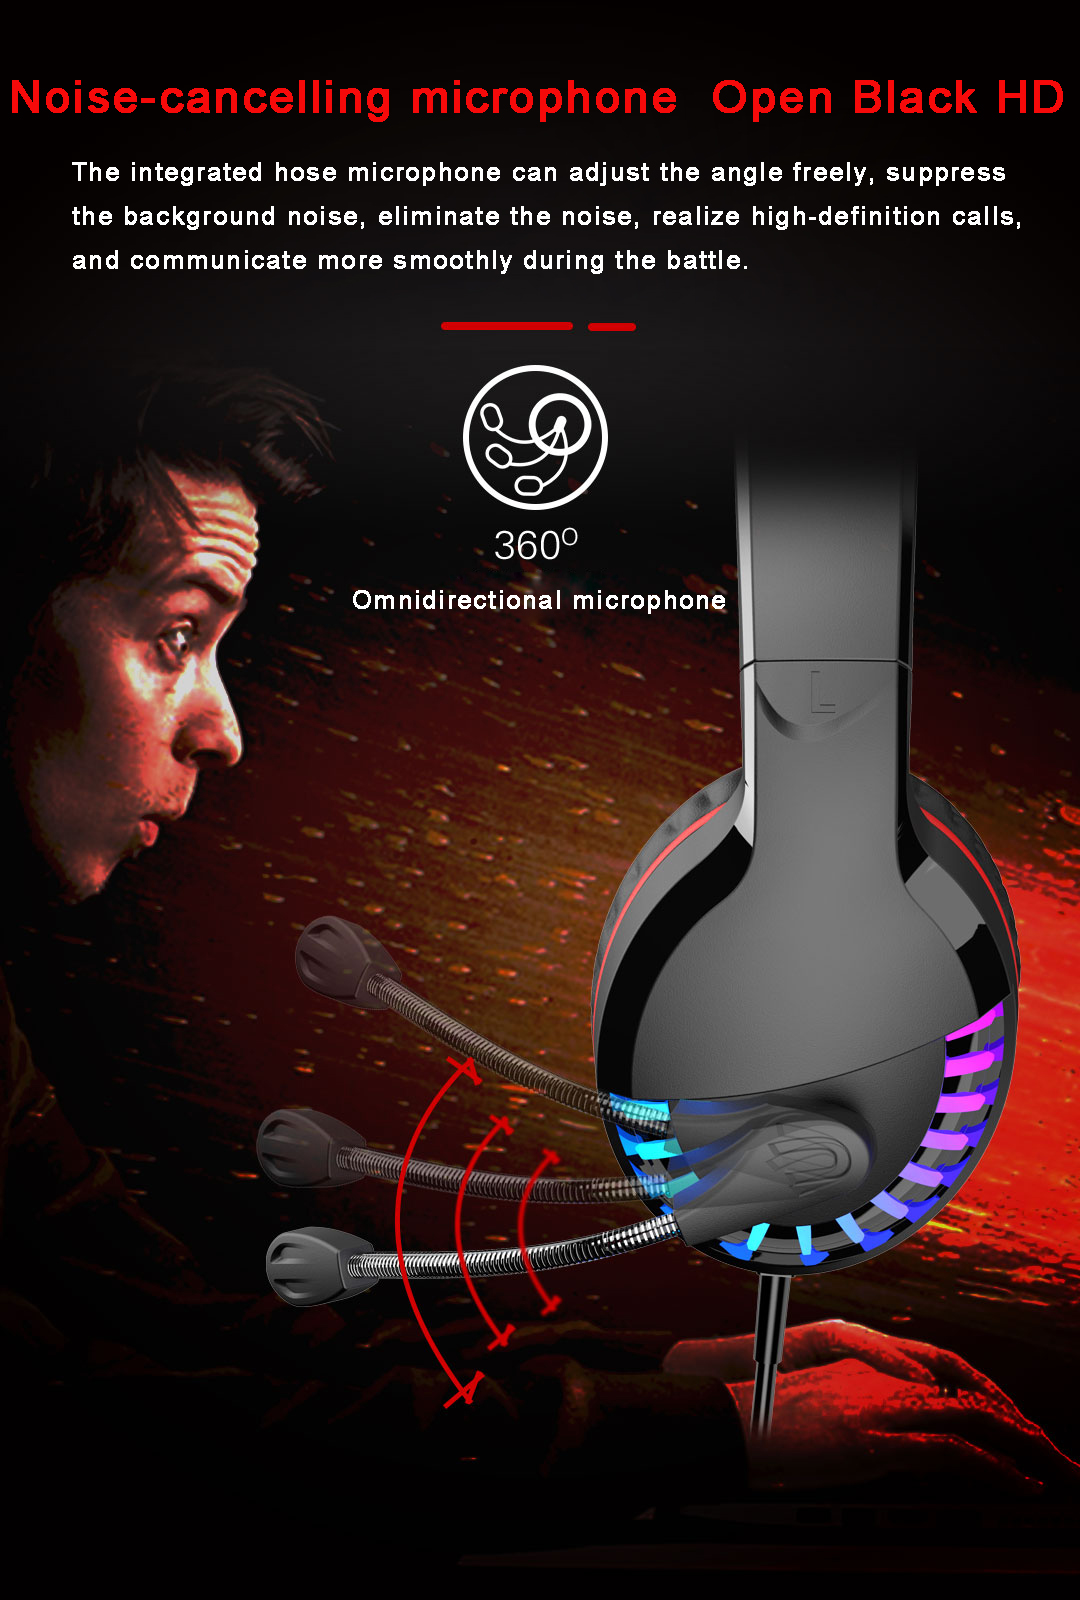 M18-Gaming-Headphones-Luminous-Colorful-Headset-35mm-Stereo-Earphone-with-Microphone-For-XBox-PS4-Ga-1722974-4